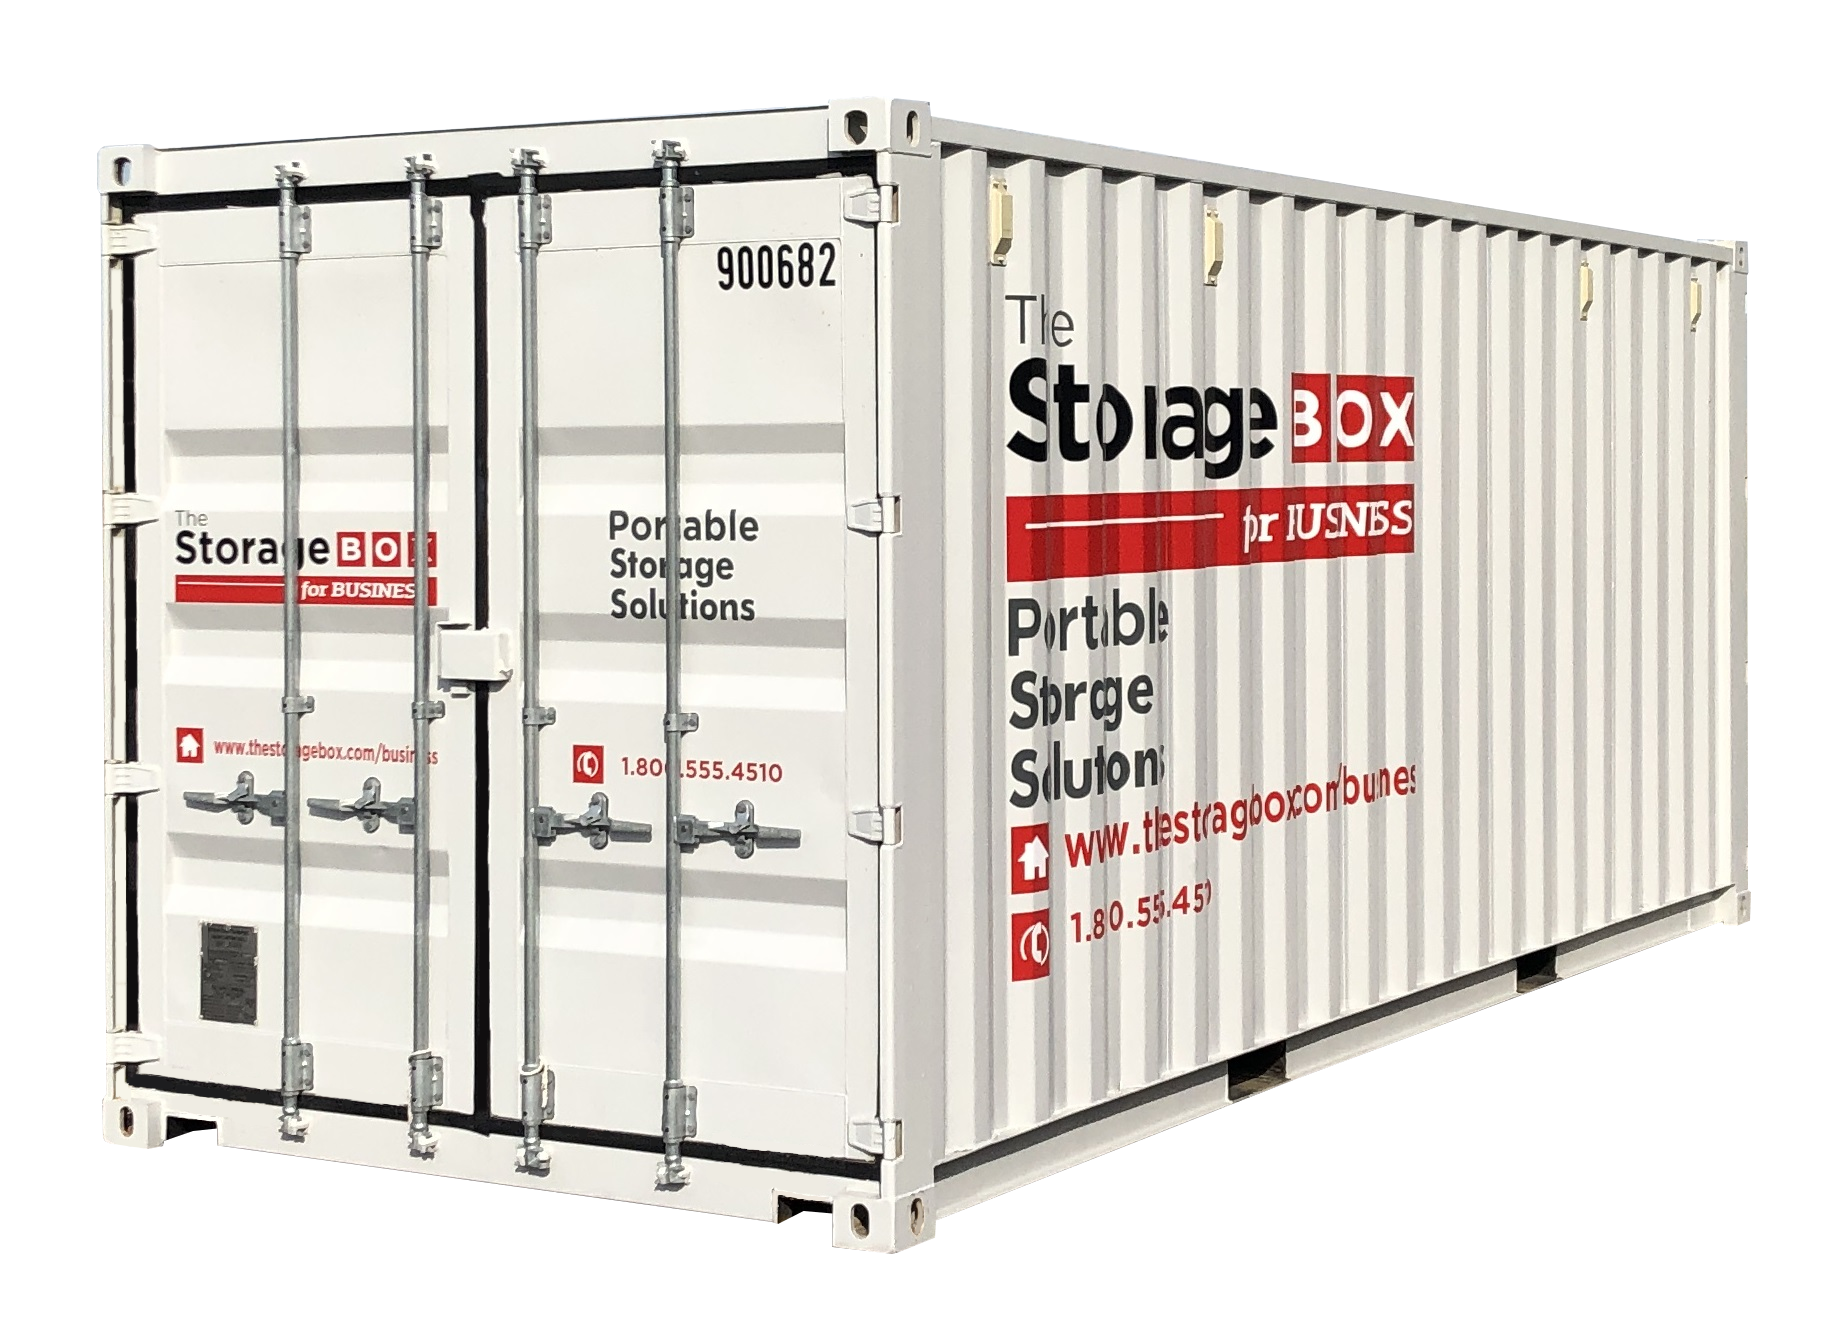 Commercial Storage Containers, The Storage Box